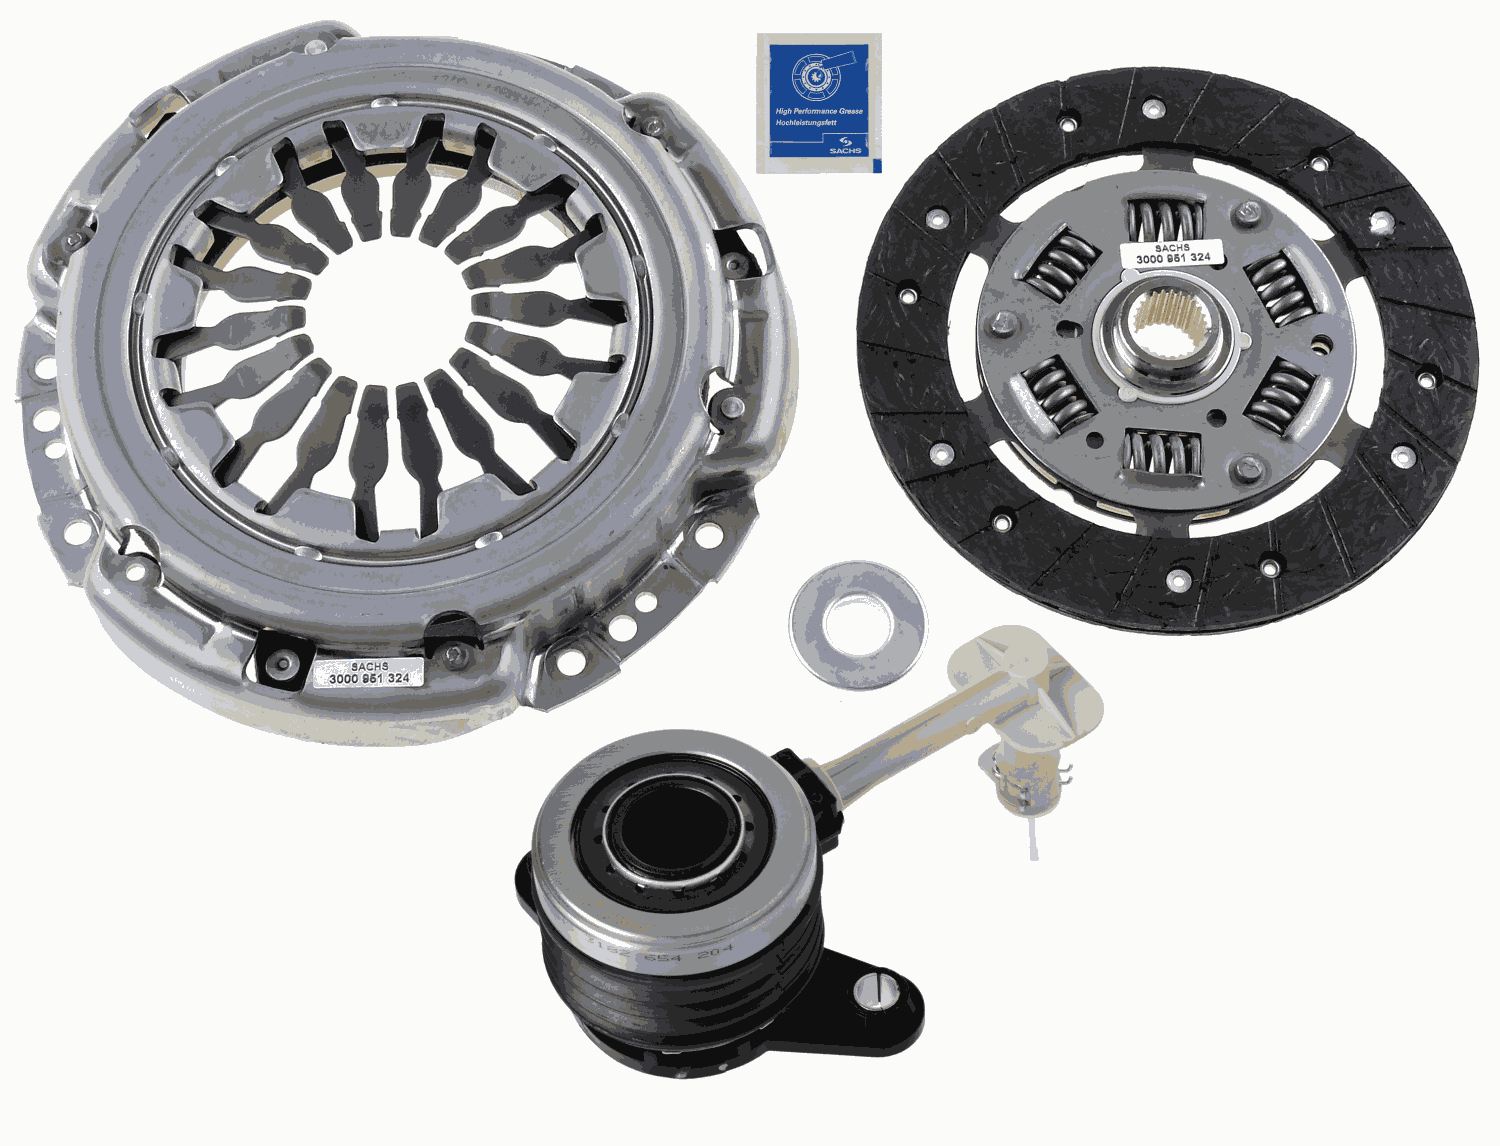 Clutch Kit Renault Modus, Clio 3 1.2 (D4F 740) With CSC (SACHS 3000 990 403)